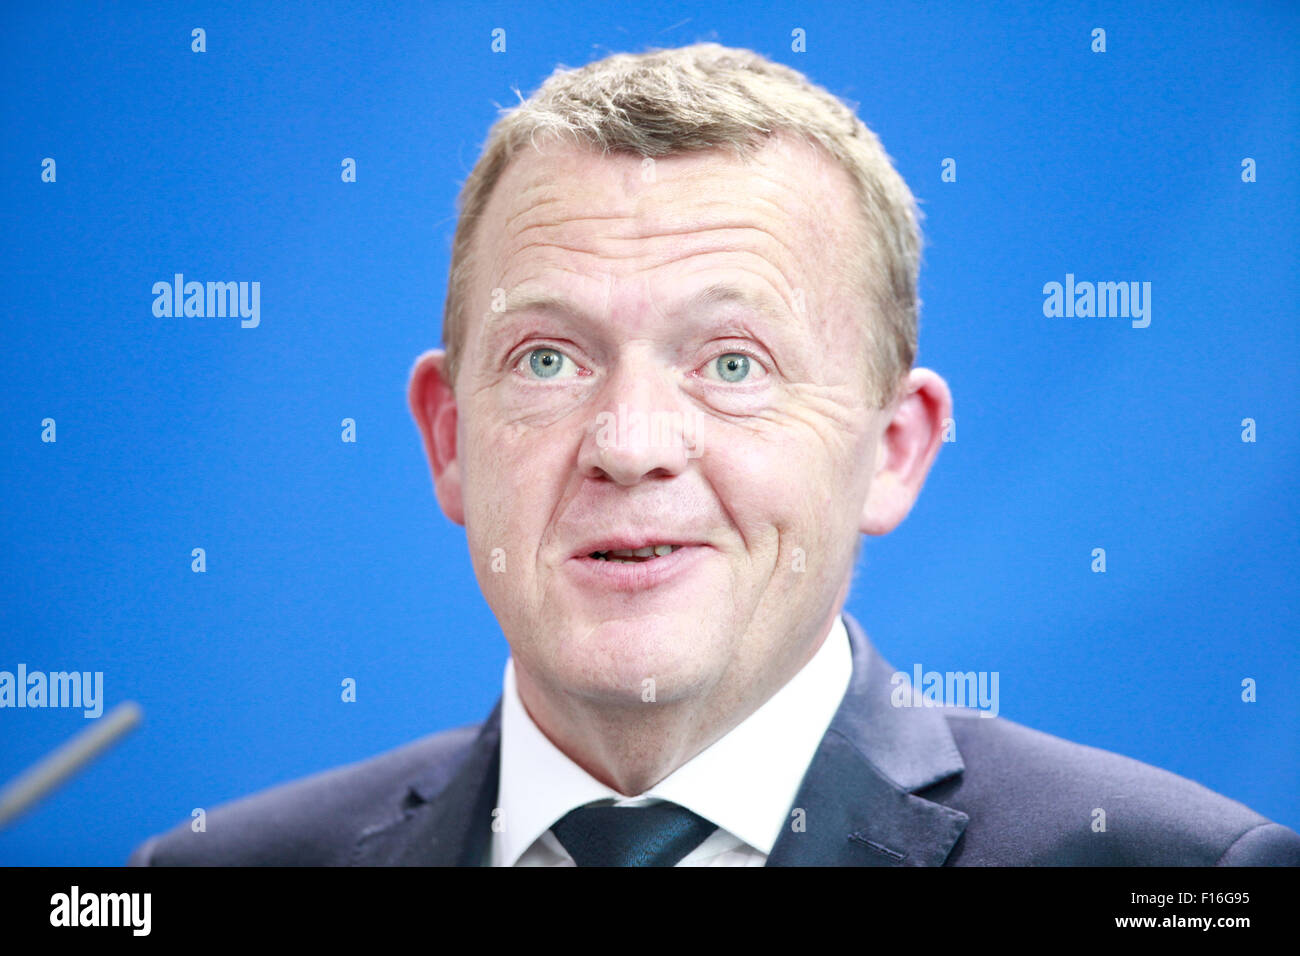 Berlin, Germany. 28th August, 2015. German Chancellor Angela Merkel and Lars Løkke Rasmussen, Prime Minister of Denmark, during joint press conference  at the German Chancellery in Berlin Germany on 28 August 2015. / Picture: Lars Løkke Rasmussen, Prime Minister of Denmark Credit:  Reynaldo Chaib Paganelli/Alamy Live News Stock Photo